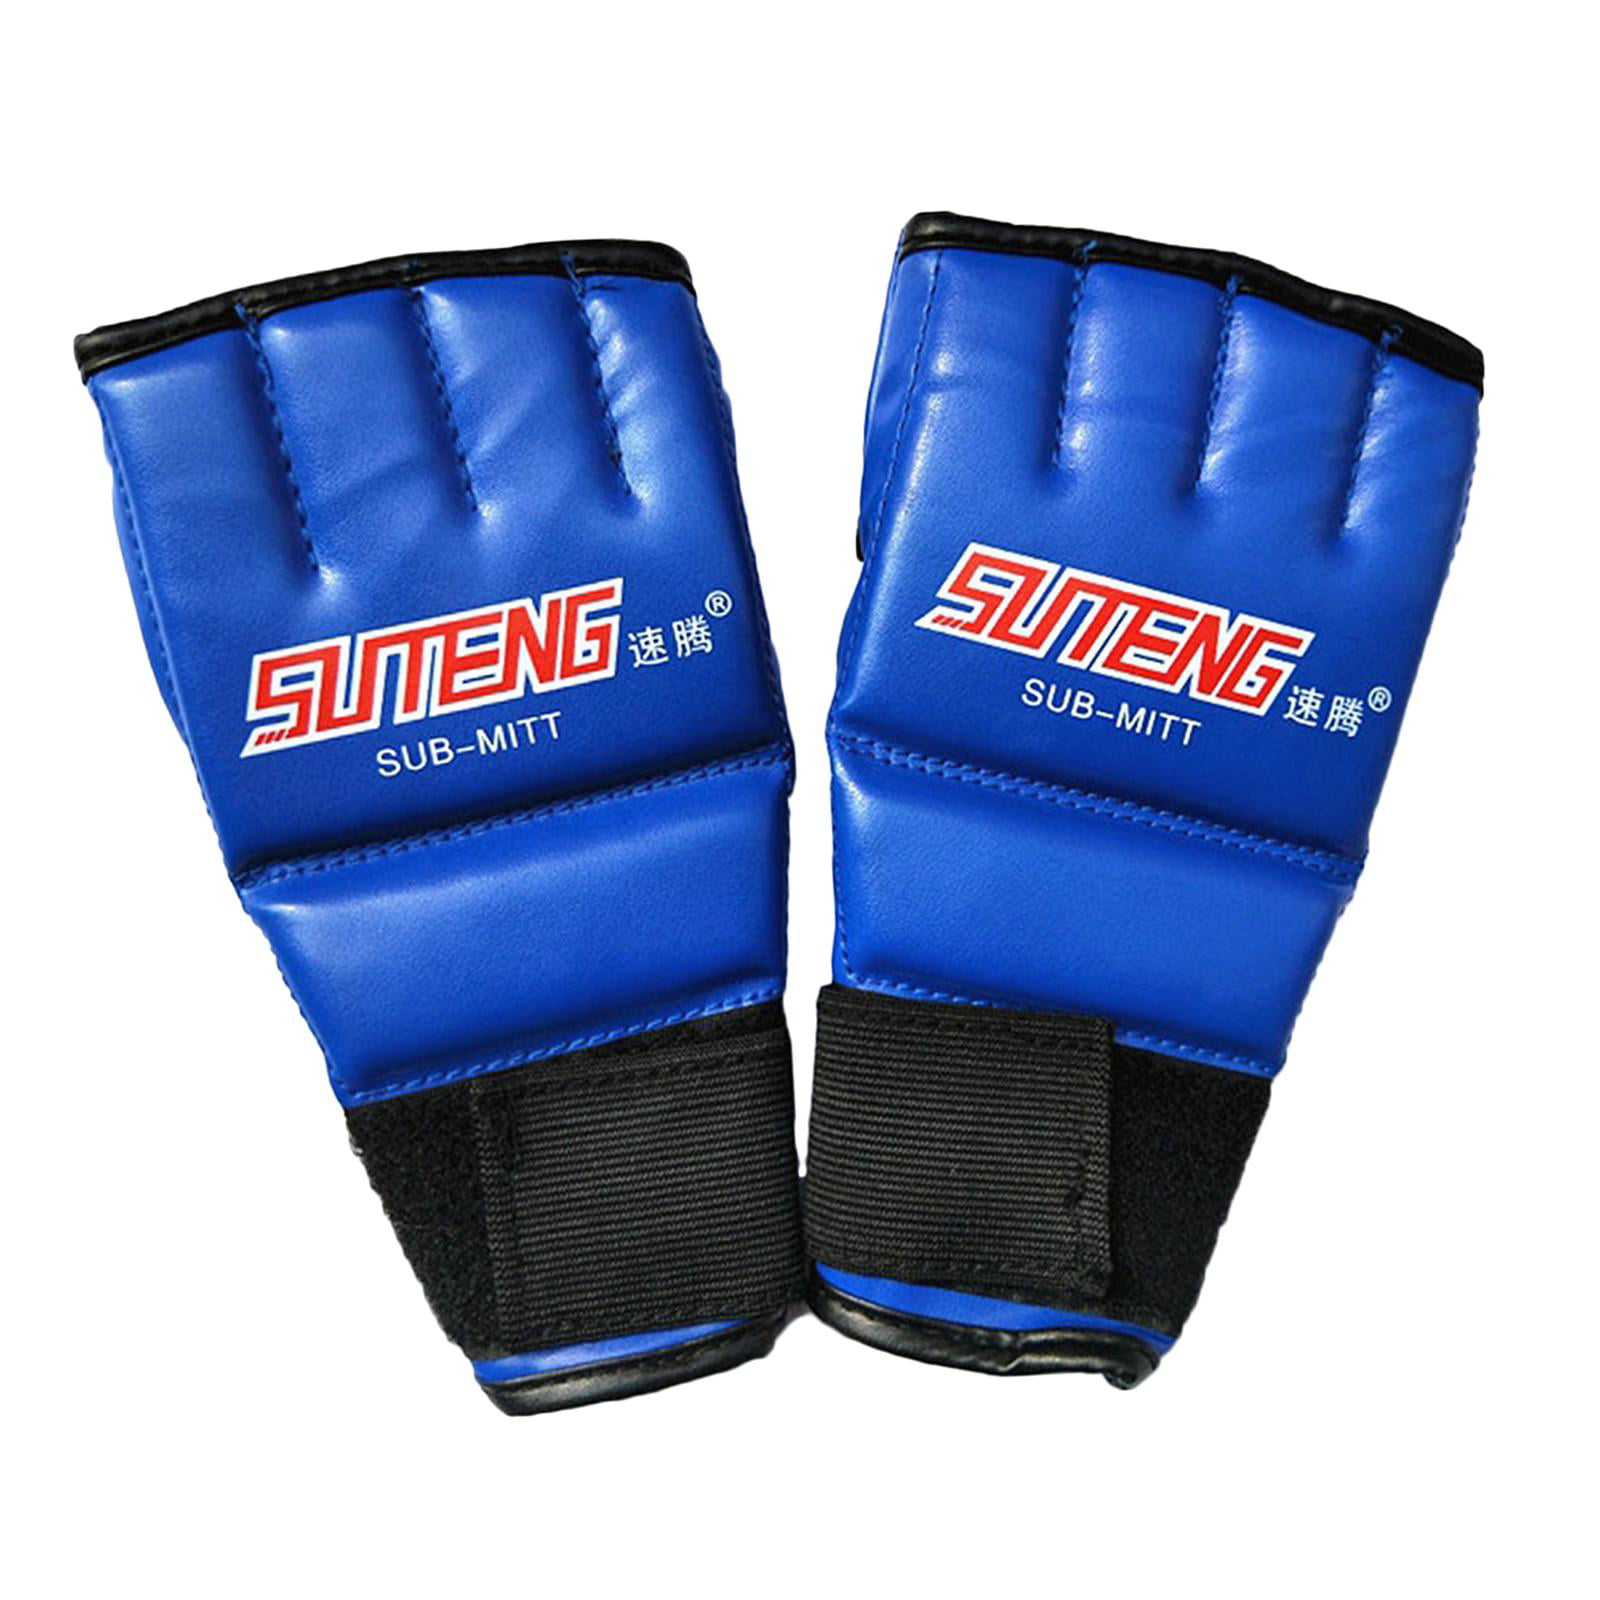 BLUE MMA Muay Thai Training Gym Half Mitts Punching Bag Sparring Boxing Gloves 